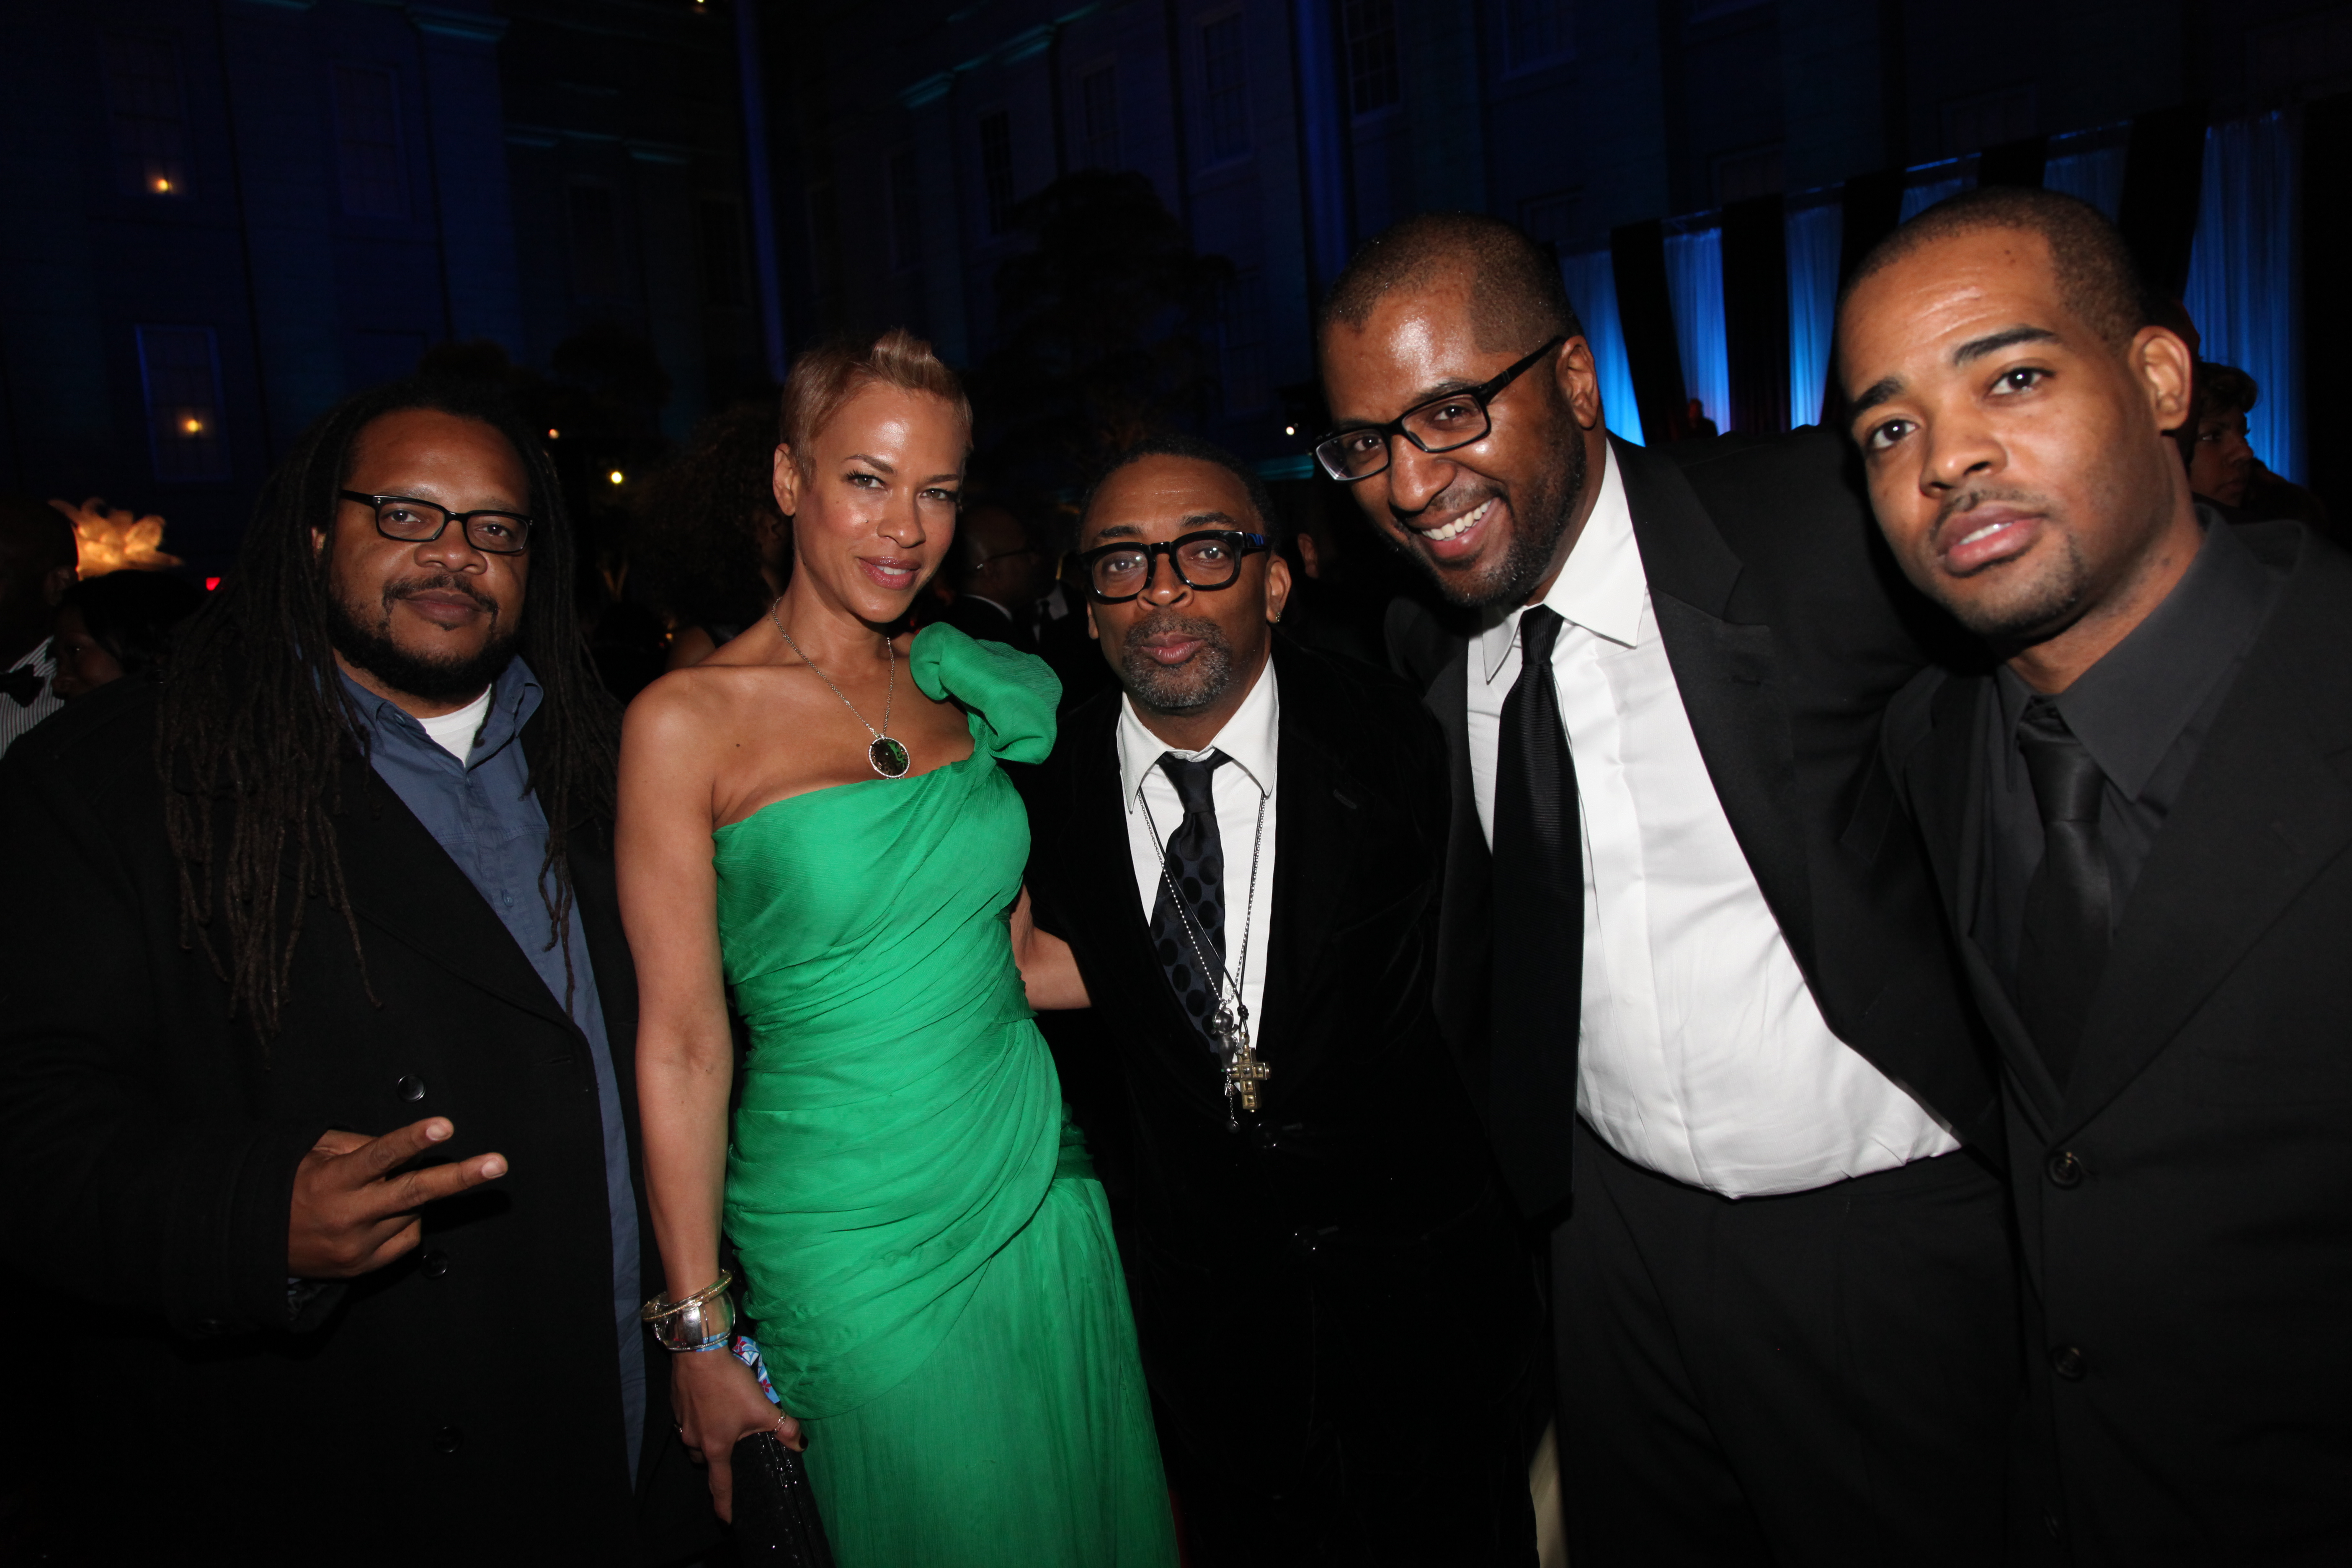 (L-R) Chris Robinson, Tonya Lewis Lee, Spike Lee, Malcolm Lee, and Kirk Fraser attend the after party for BET Honors 2012 at the Smithsonian American Art Museum & National Portrait Gallery on January 14, 2012 in Washington, DC.